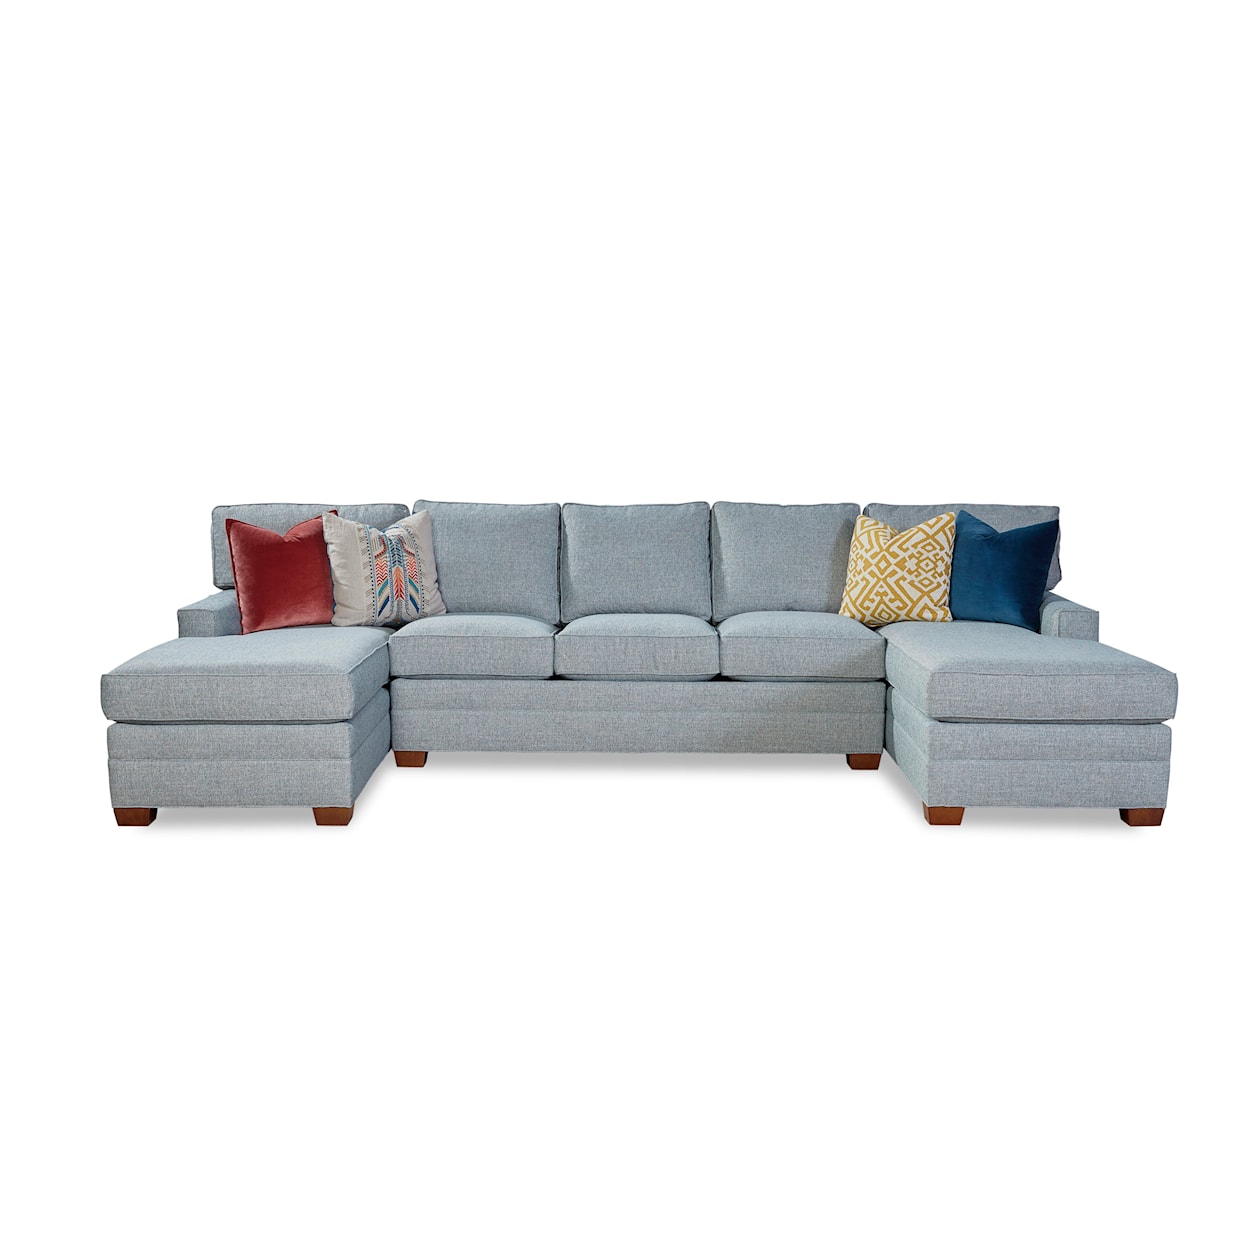 Huntington House 2062 Collection 5-Seat Sectional Sofa with Chaises